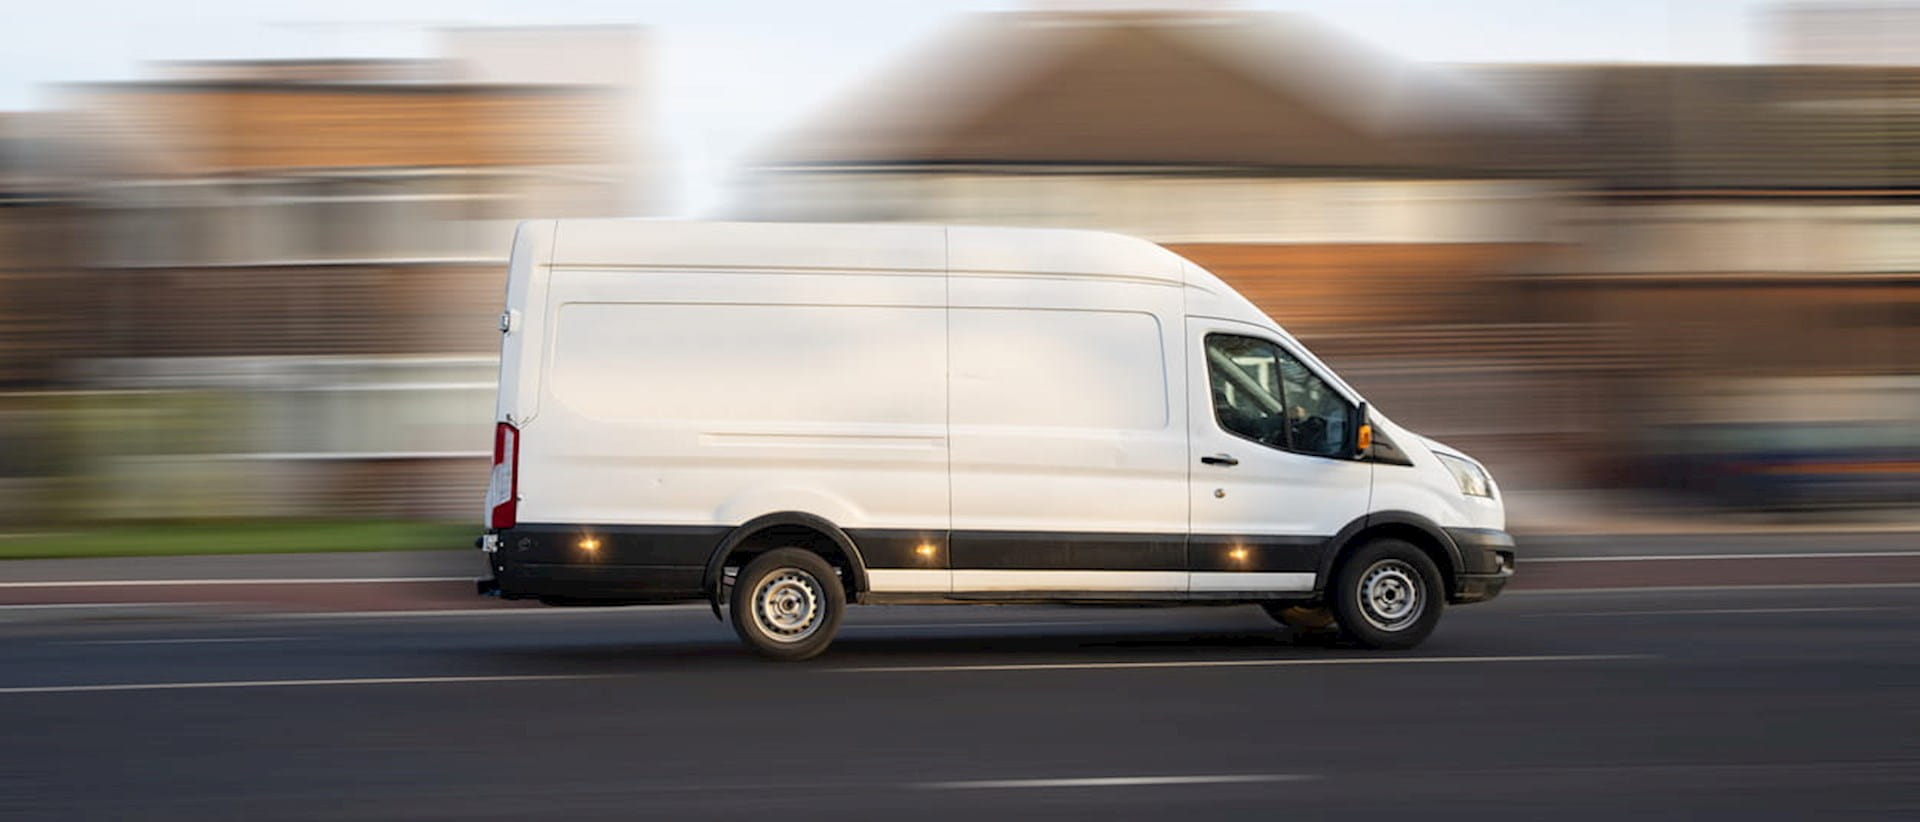 Photograph of delivery van